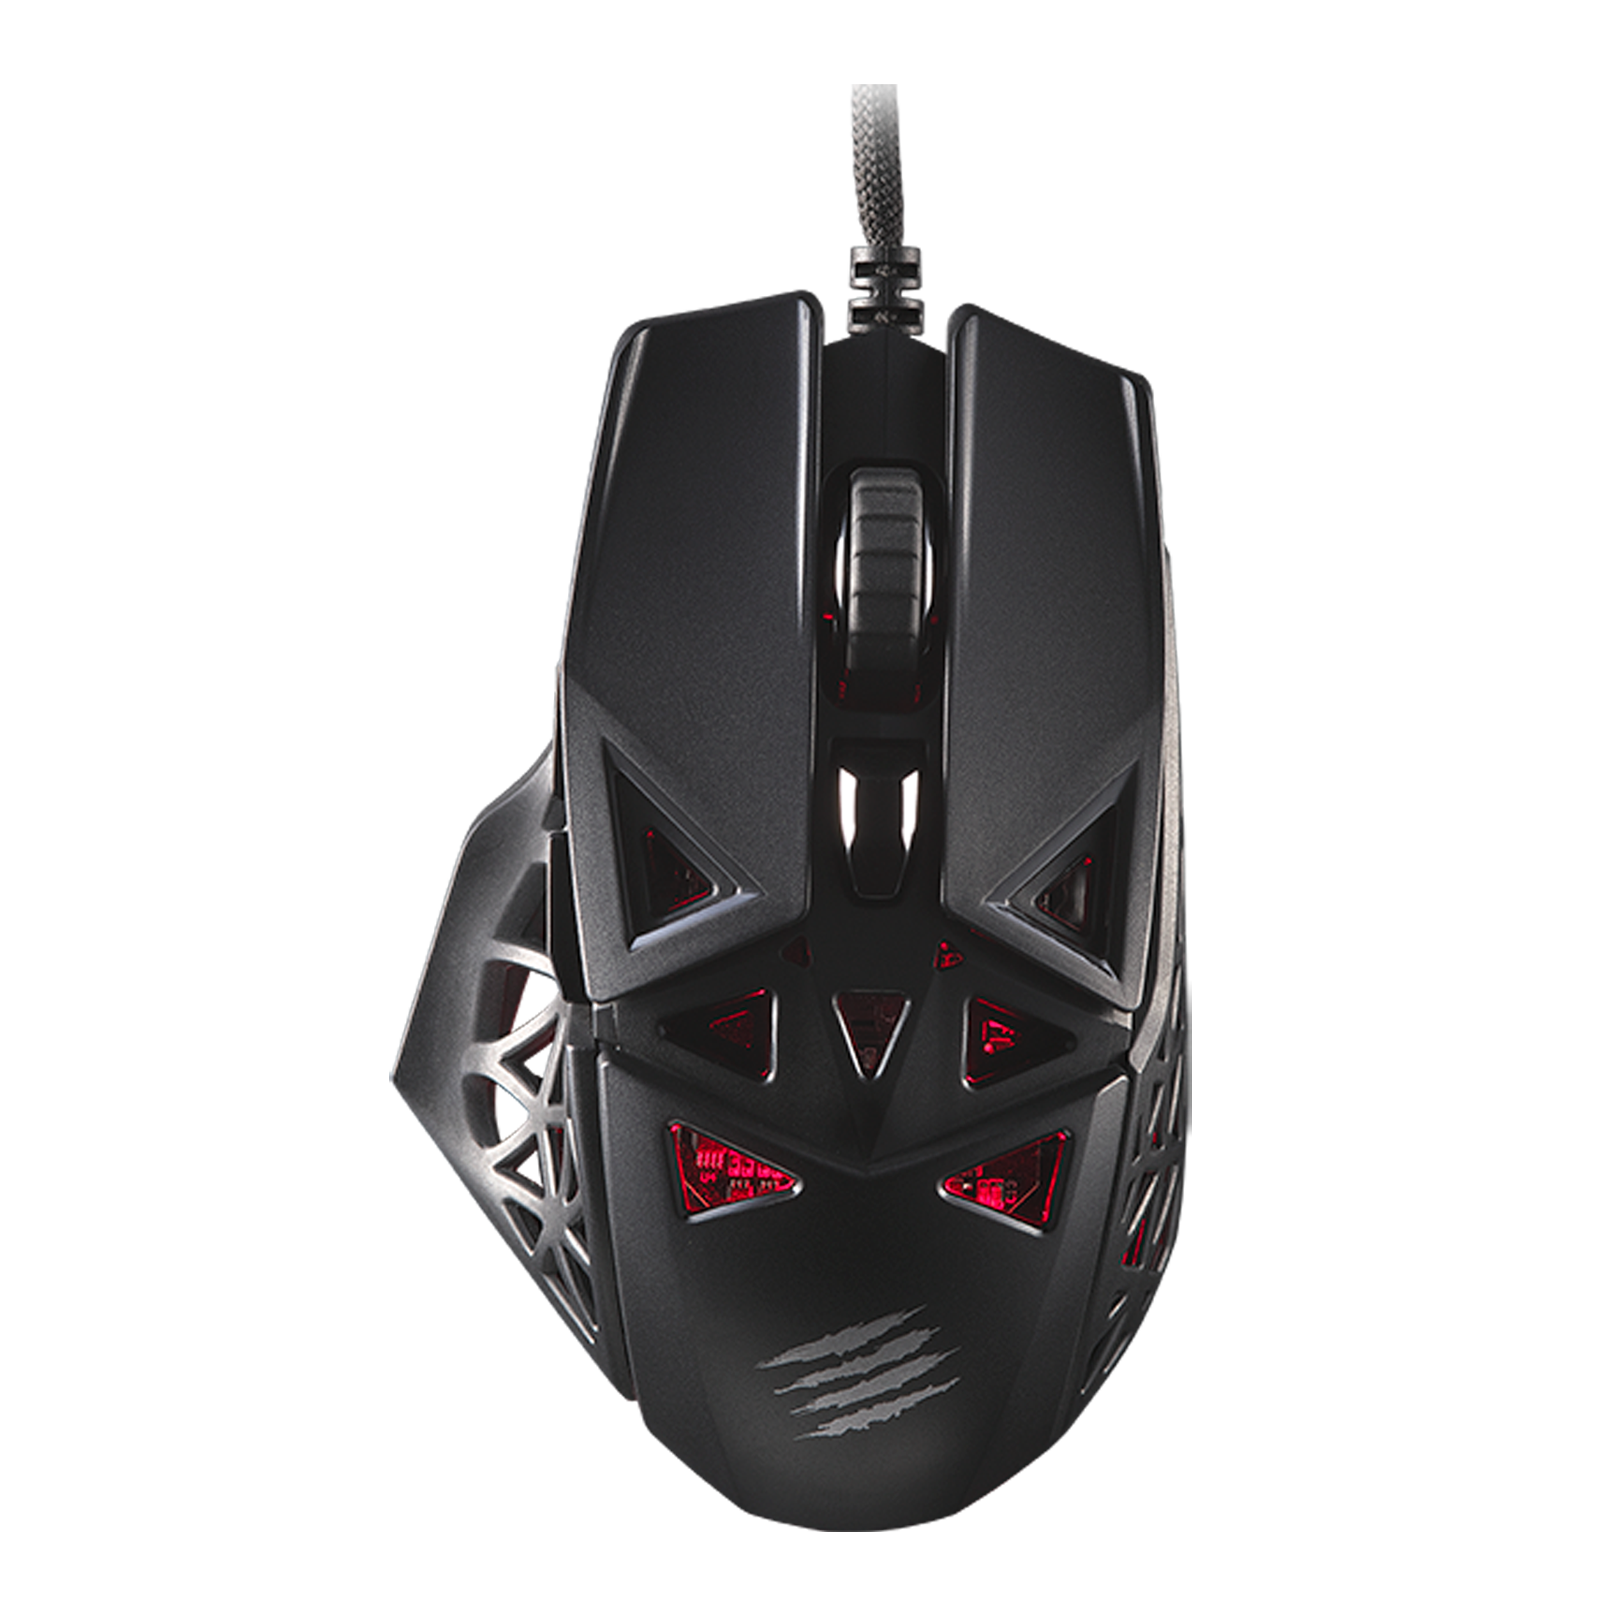 MAD CATZ M.O.J.O. M1 Wired Optical Gaming Mouse with Customizable Buttons  (12000 DPI, Dakota Technology, Black)